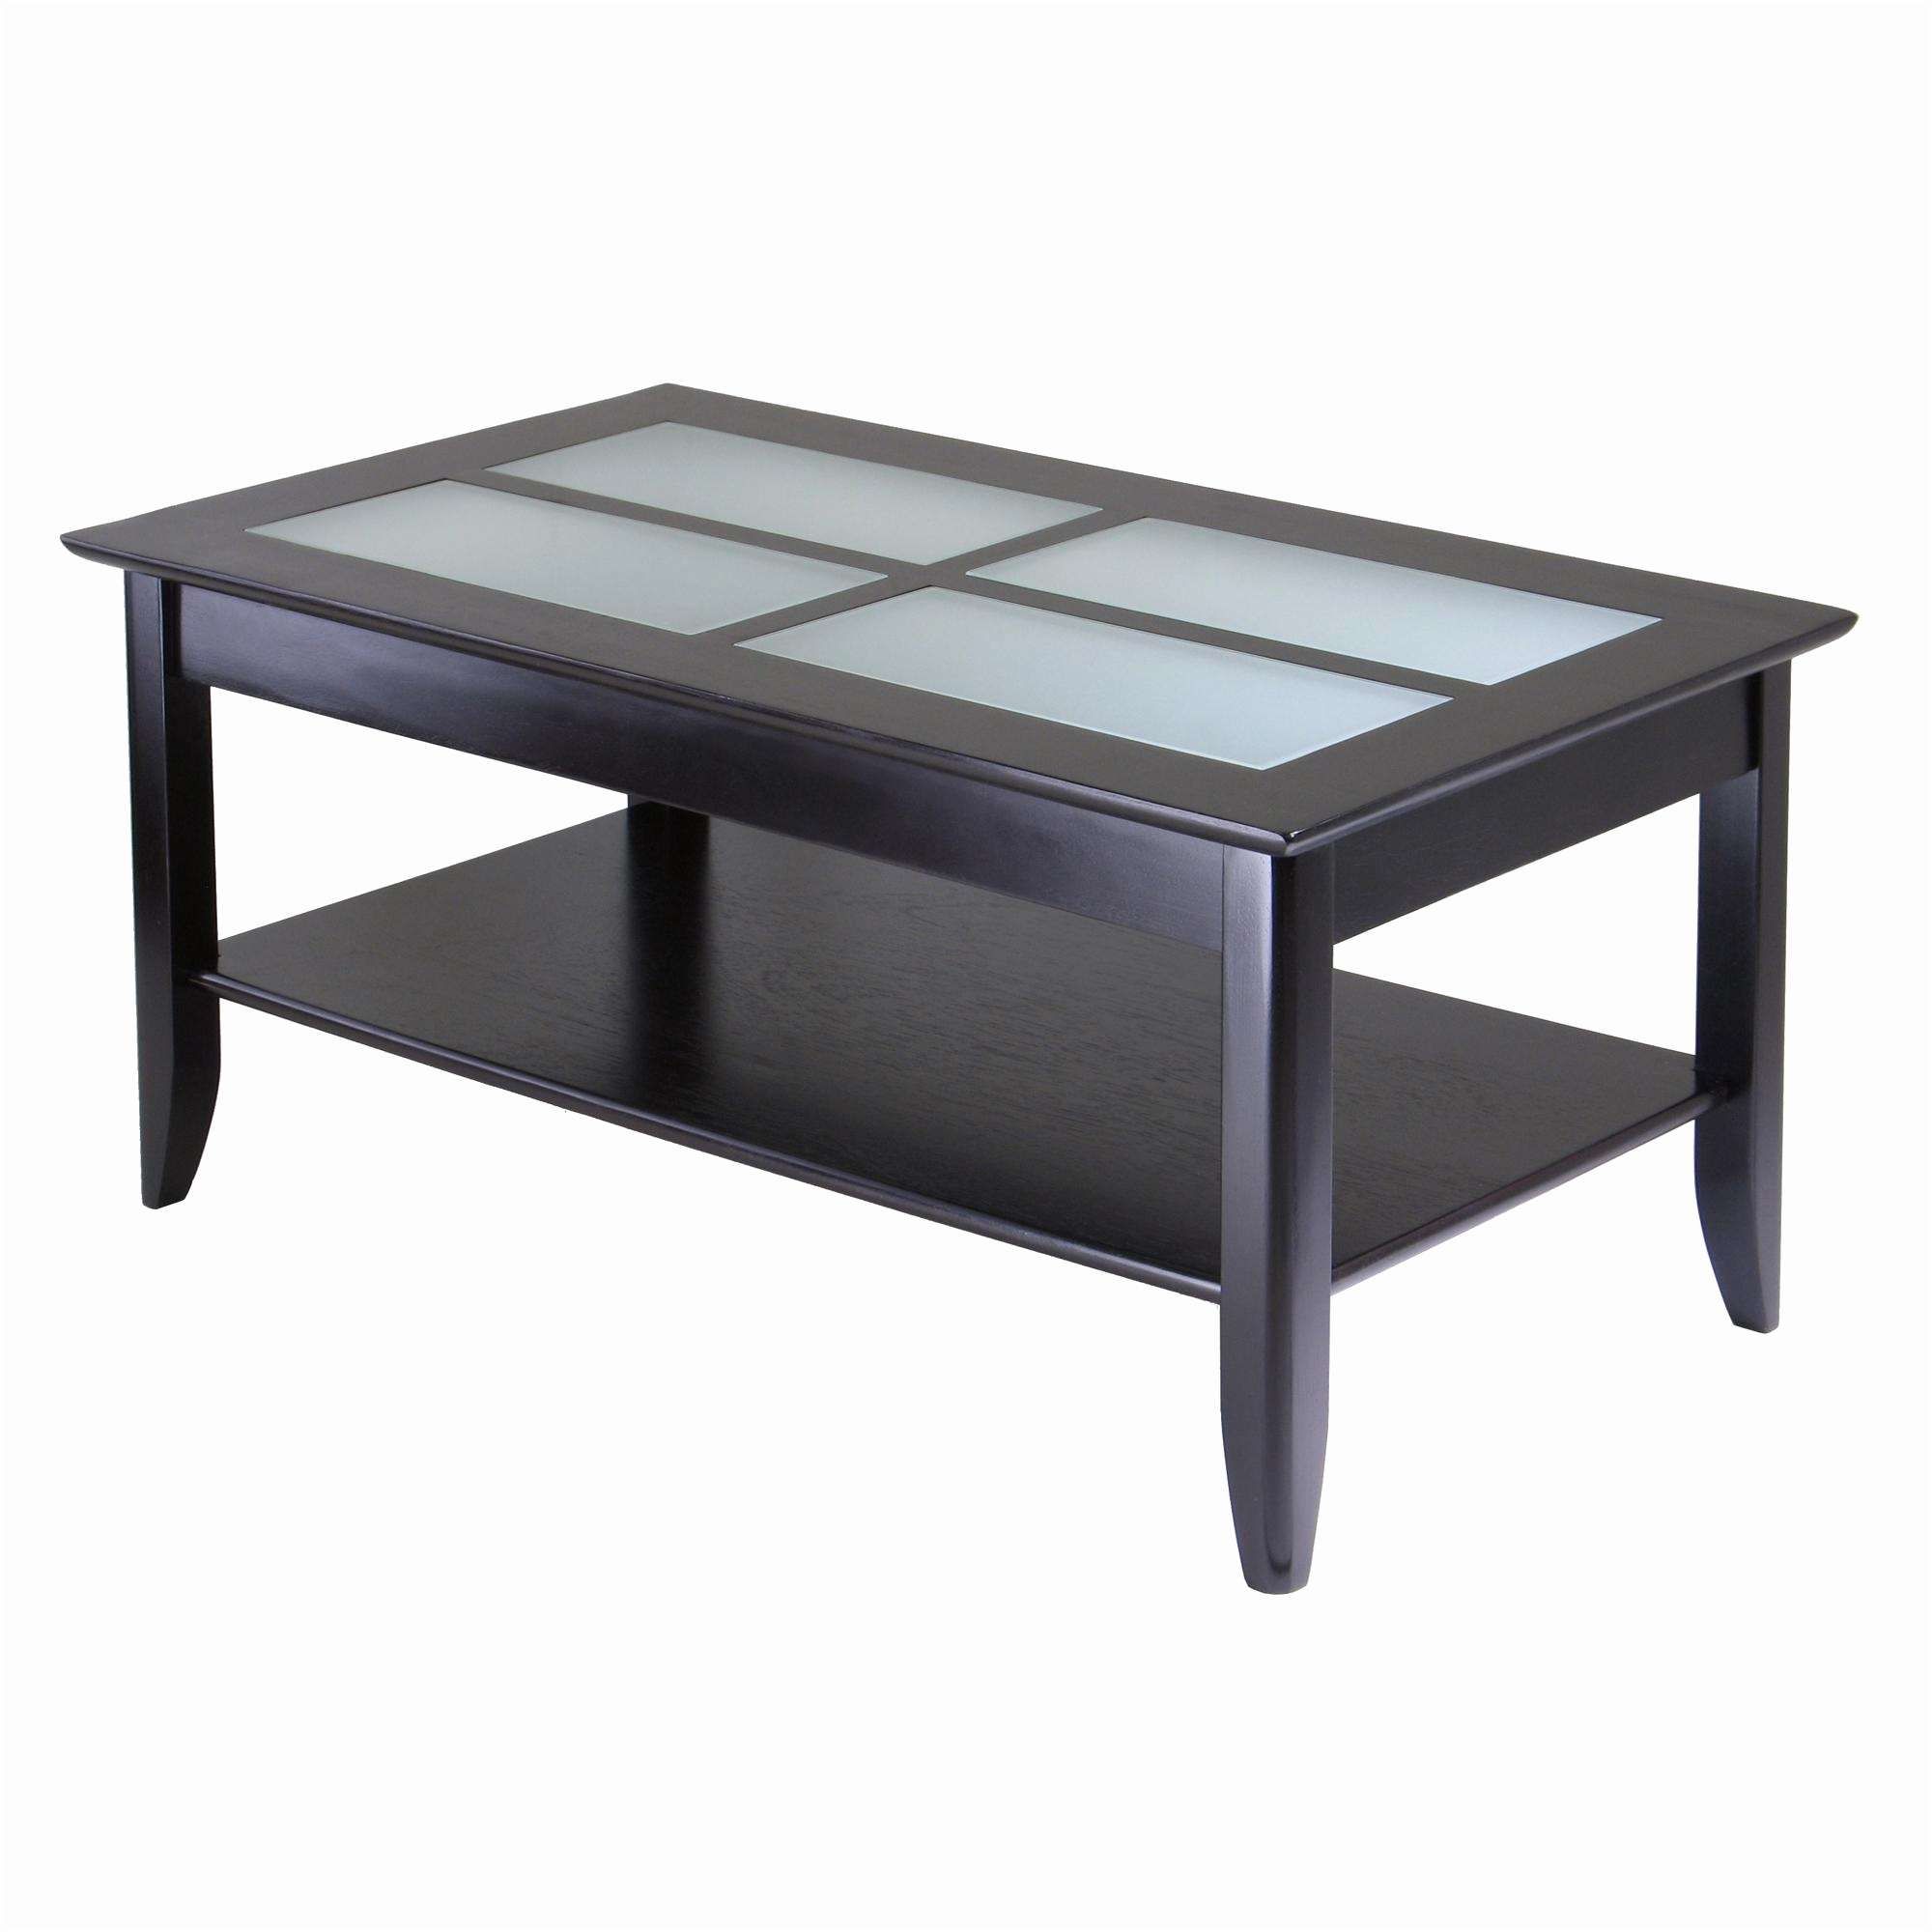 Trendy Black Wood And Glass Coffee Tables Within Coffee Tables : Frosted Glass Coffee Table Unique Winsome Wood (View 12 of 20)